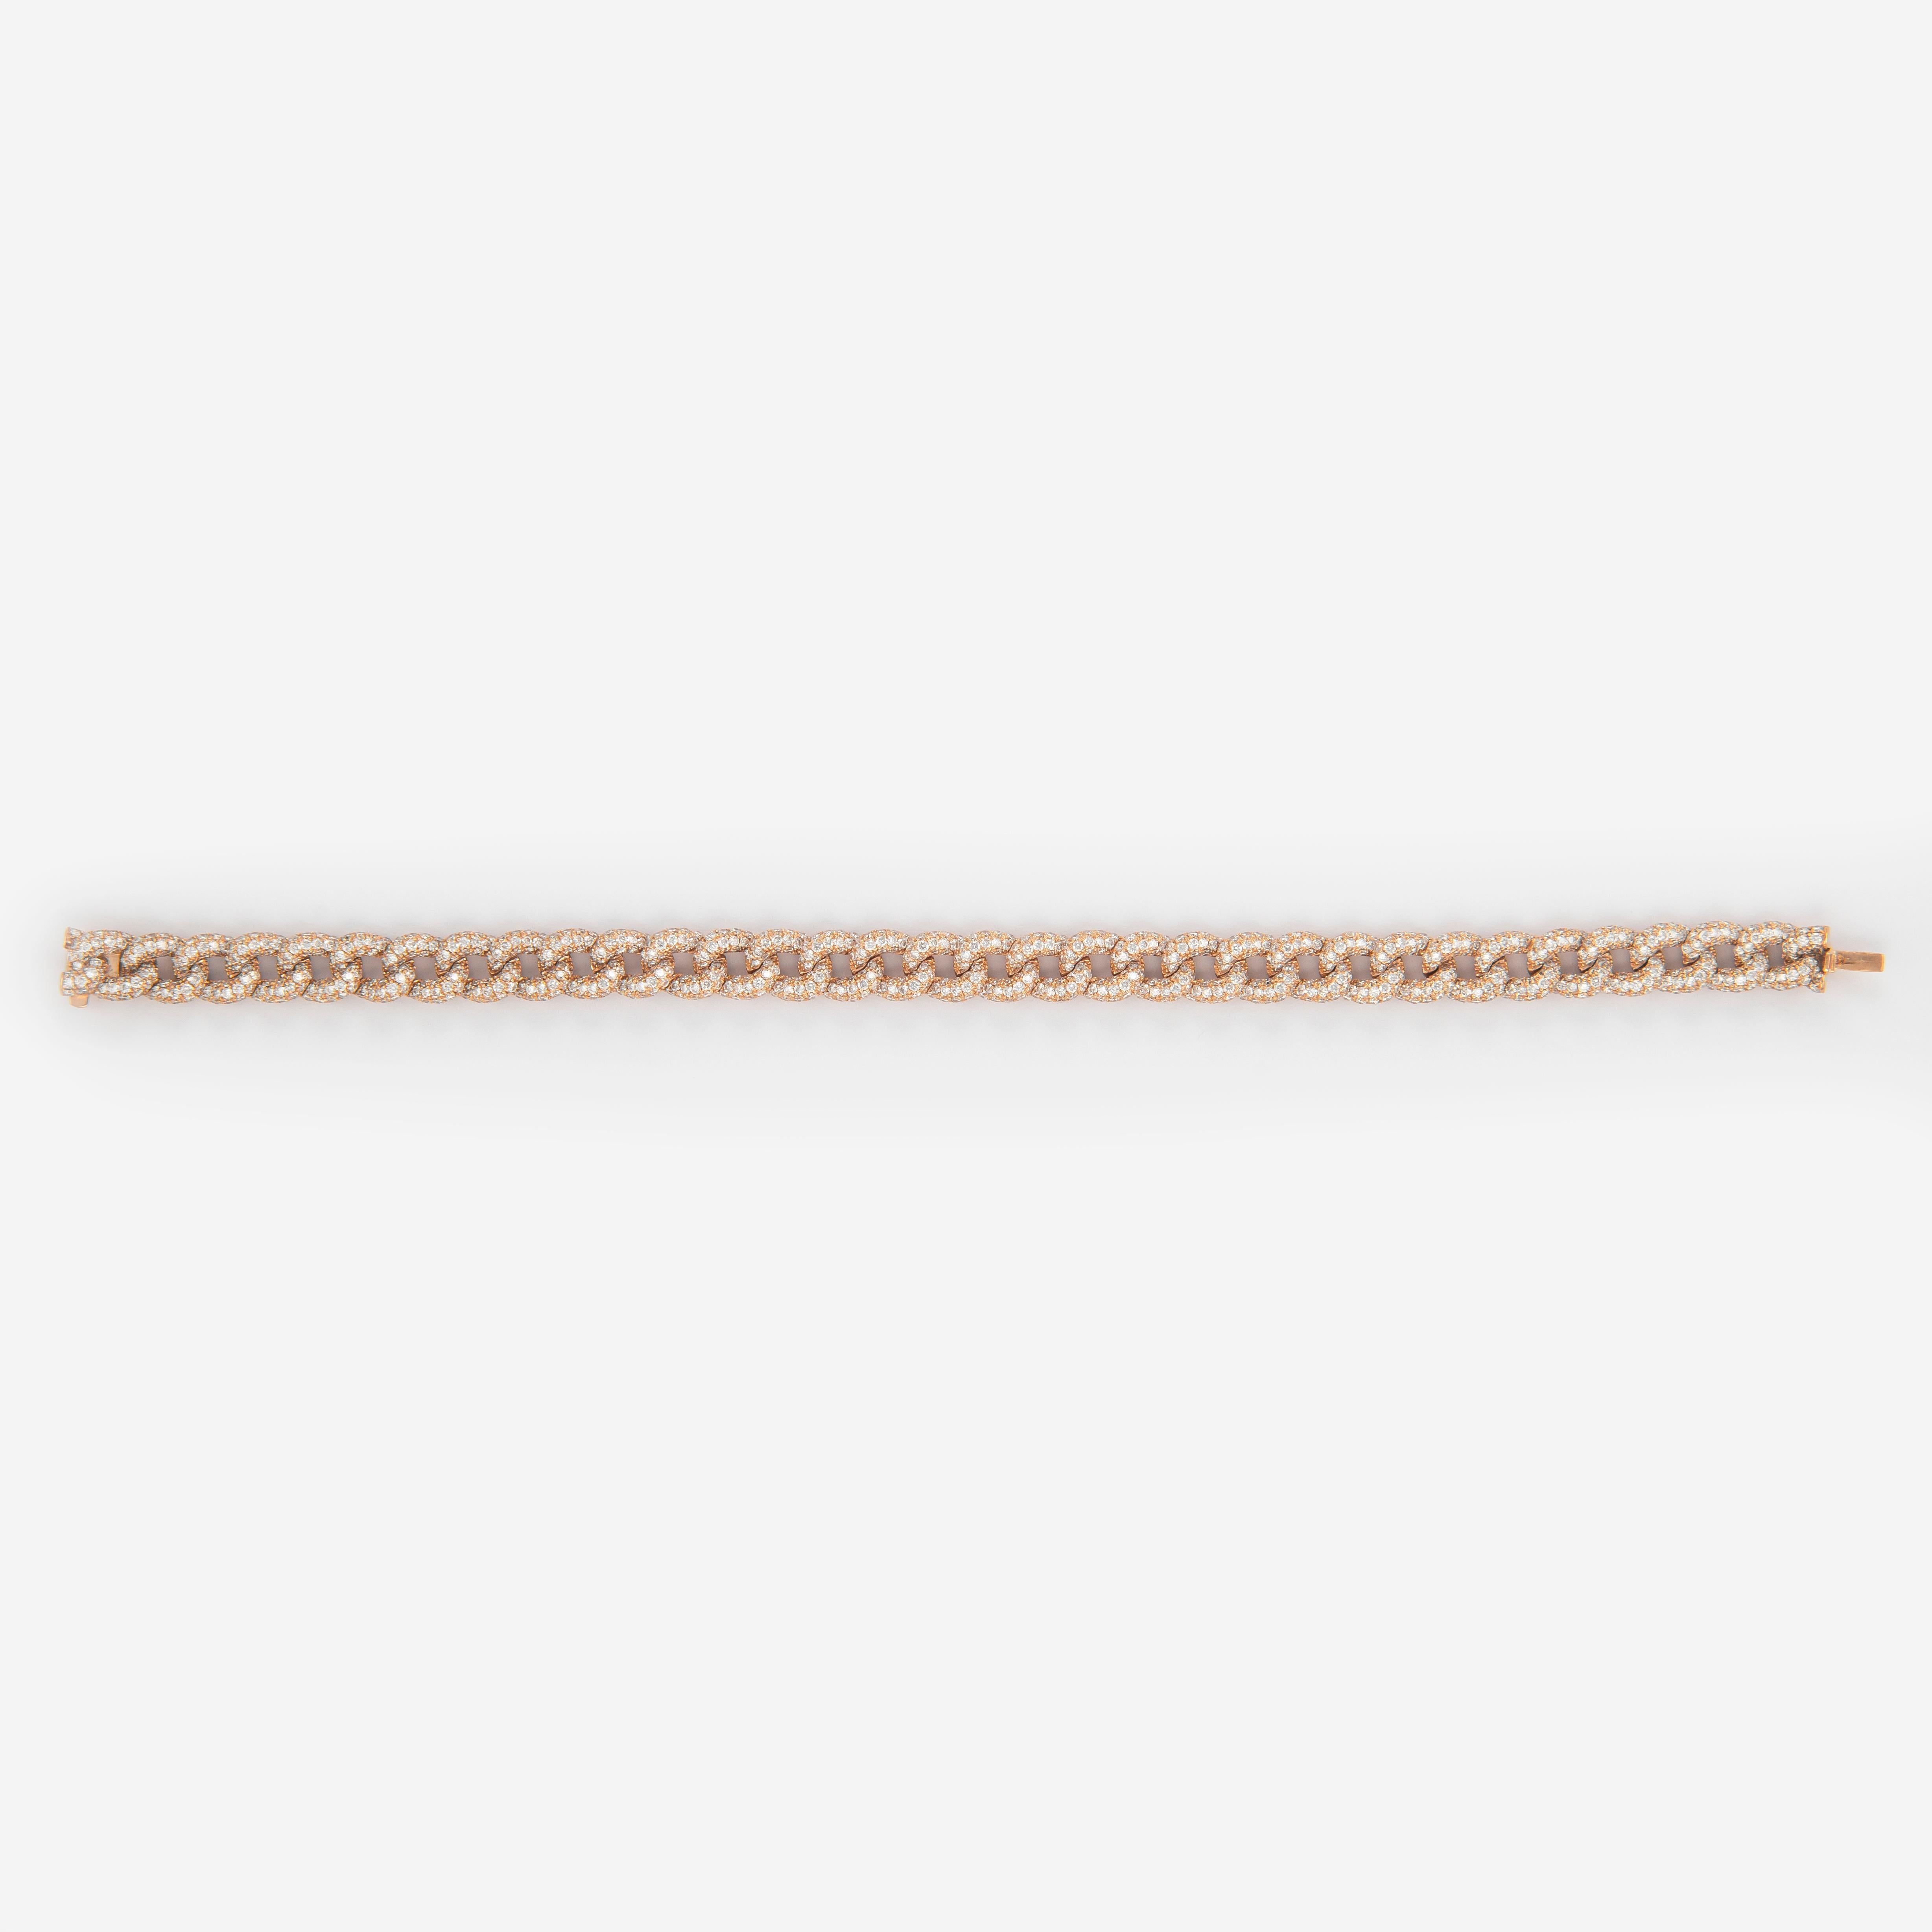 Modern diamond cuban link bracelet. By Alexander of Beverly Hills.
1043 round brilliant diamonds, 6.20 carats total. Approximately G/H color and SI clarity. 18k rose gold.
Accommodated with an up to date appraisal by a GIA G.G., please contact us